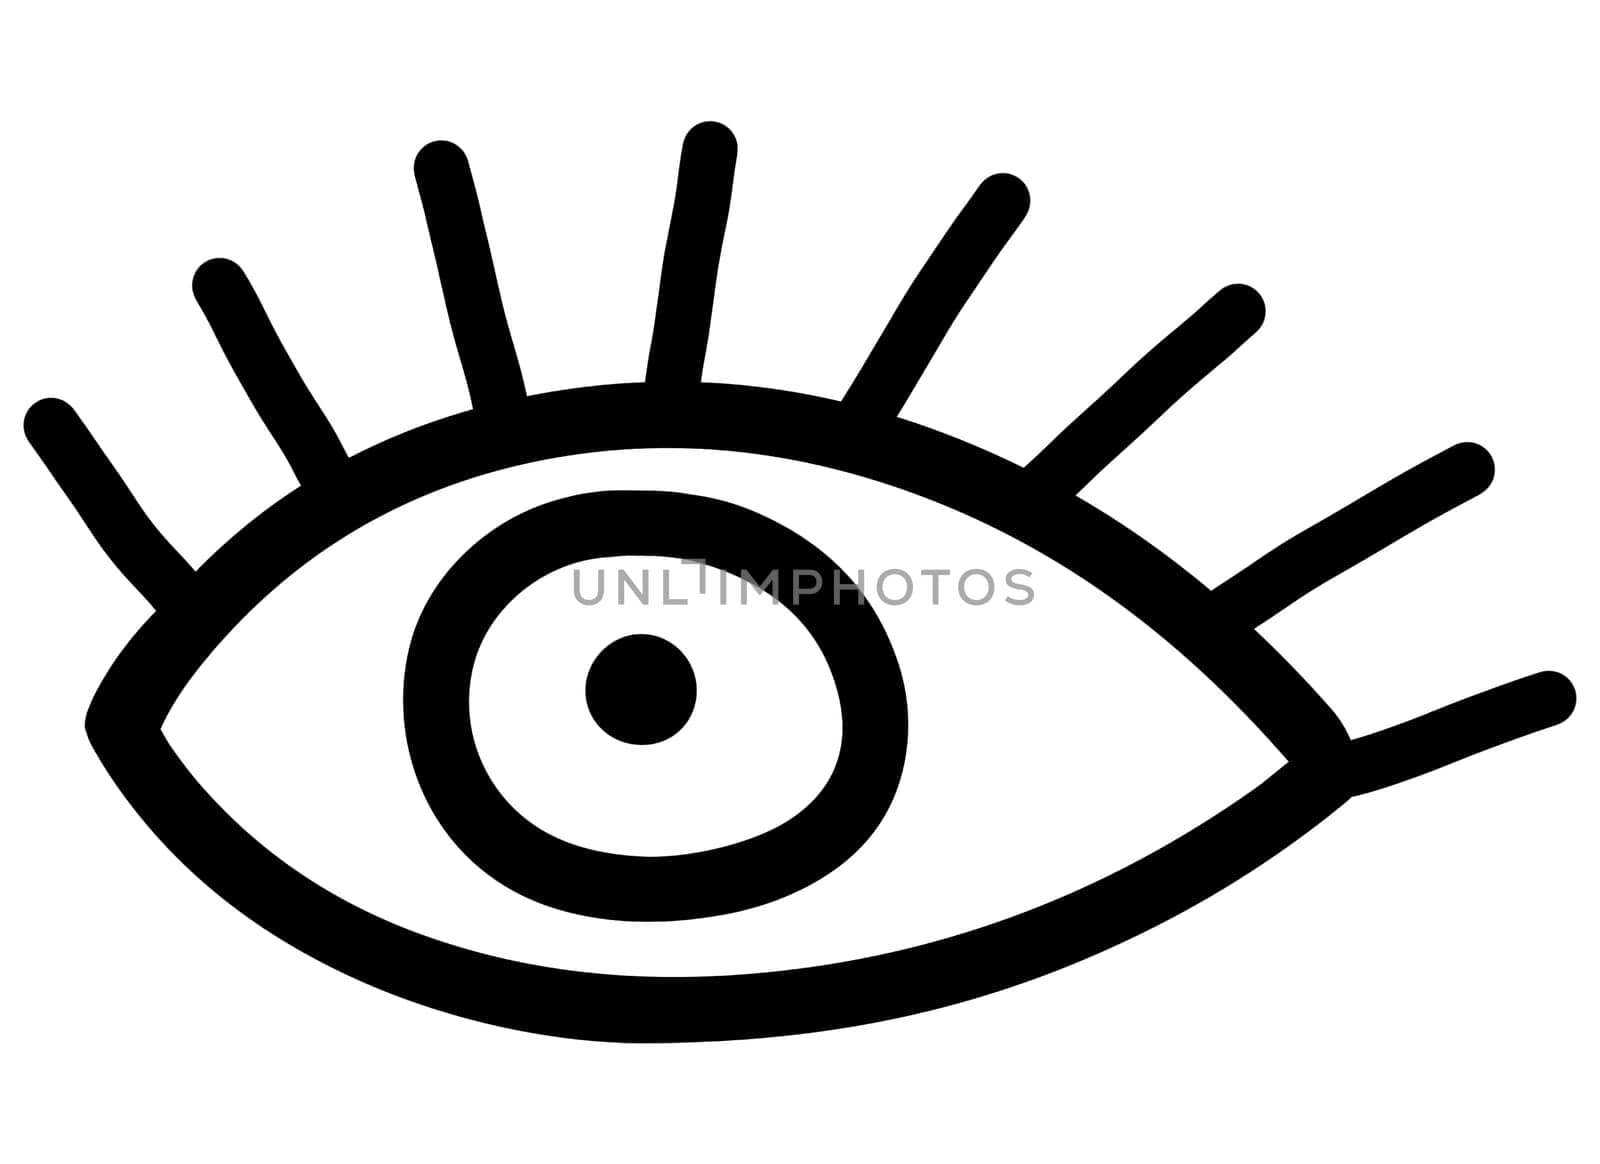 Printable Coloring Page for Kids. Black and White Eye Icon Isolated Illustration. Coloring Book with Eye.